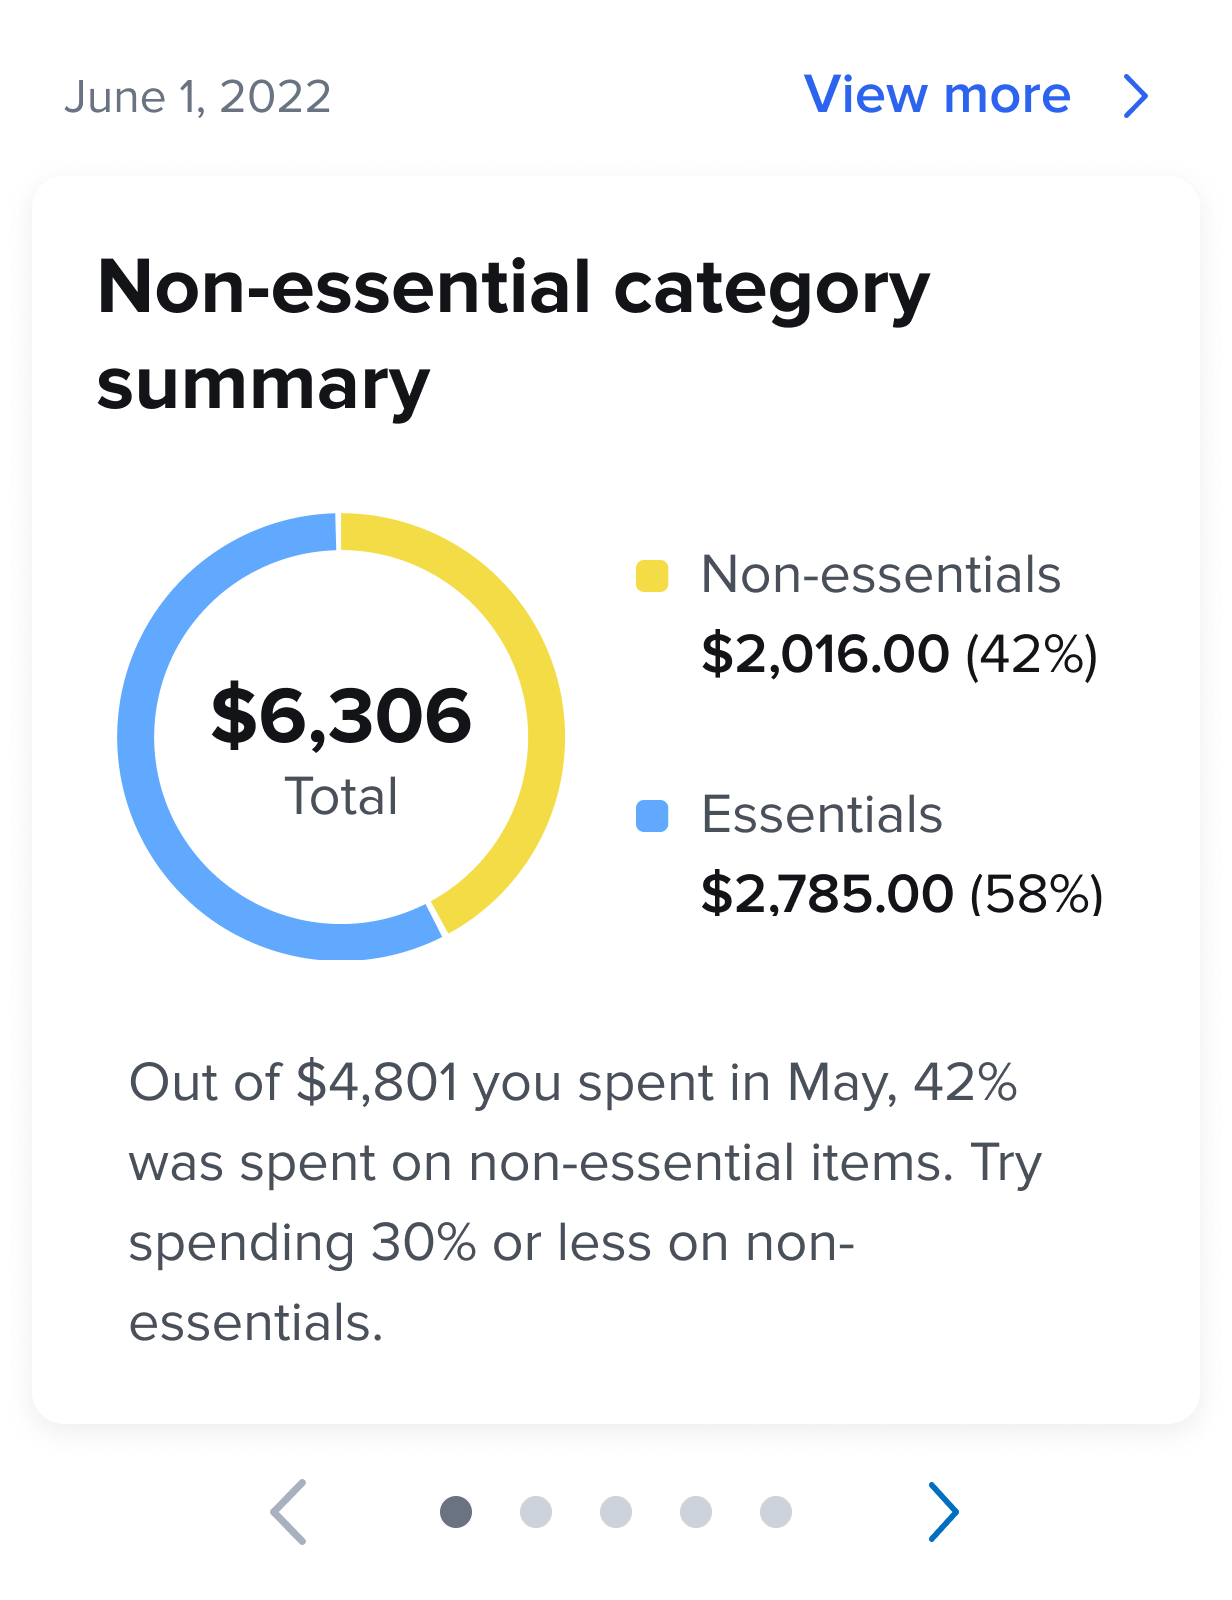 monthly_non-essential_category_summary_v2_mini-widget.png